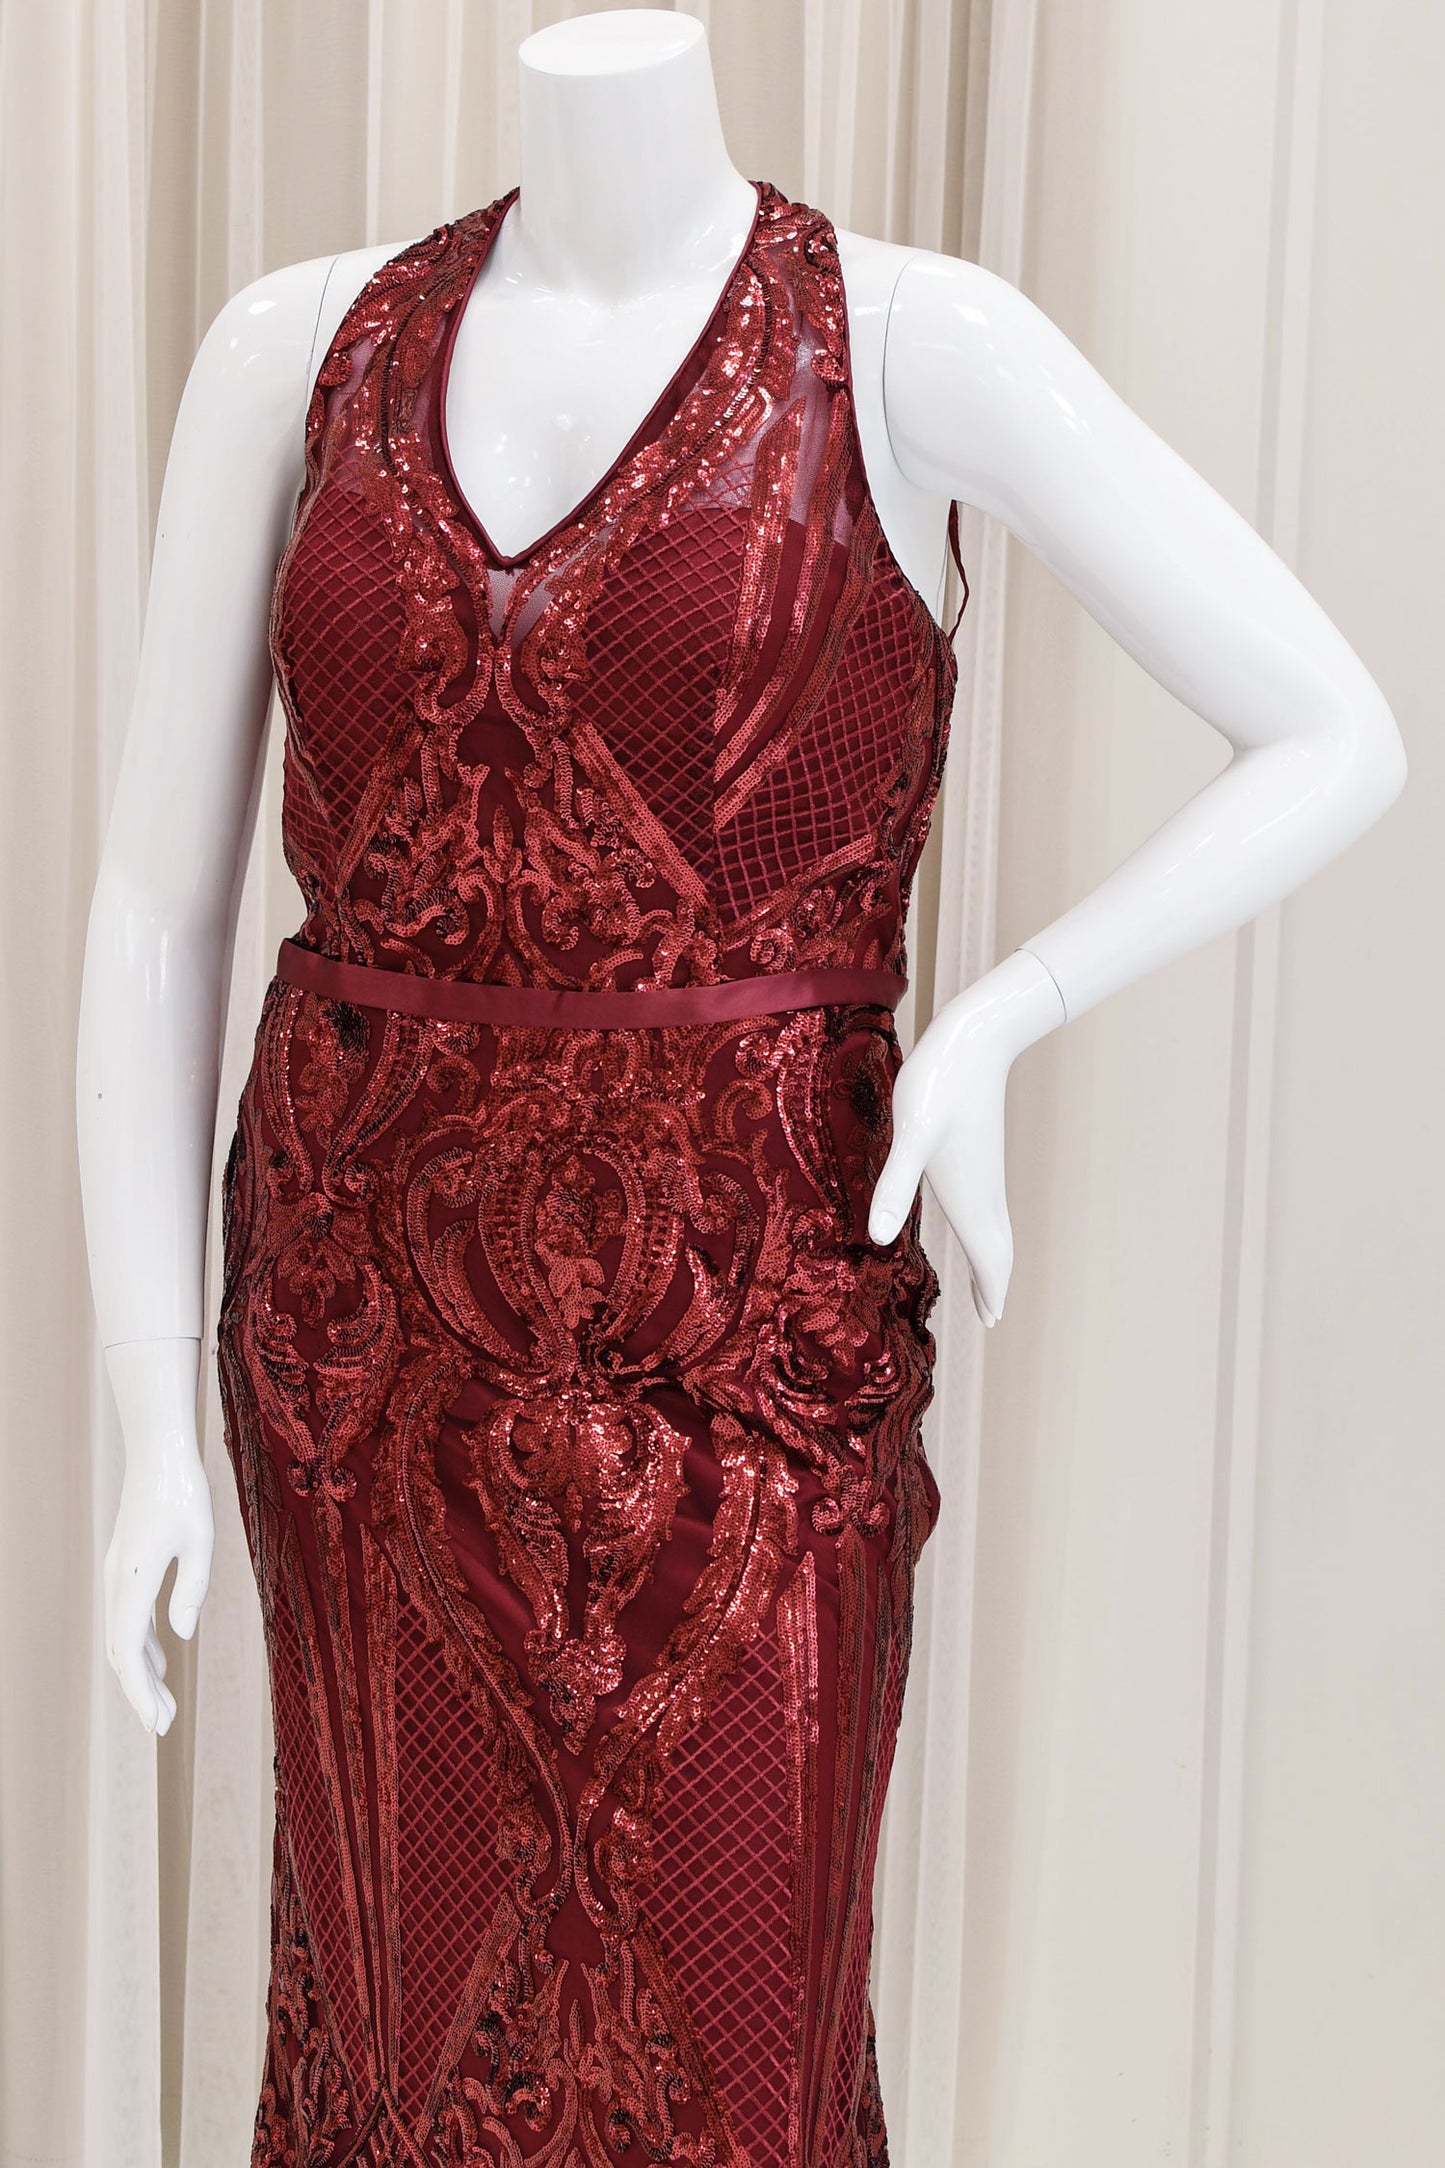 Dalenna Sequin Evening Gown in Burgundy